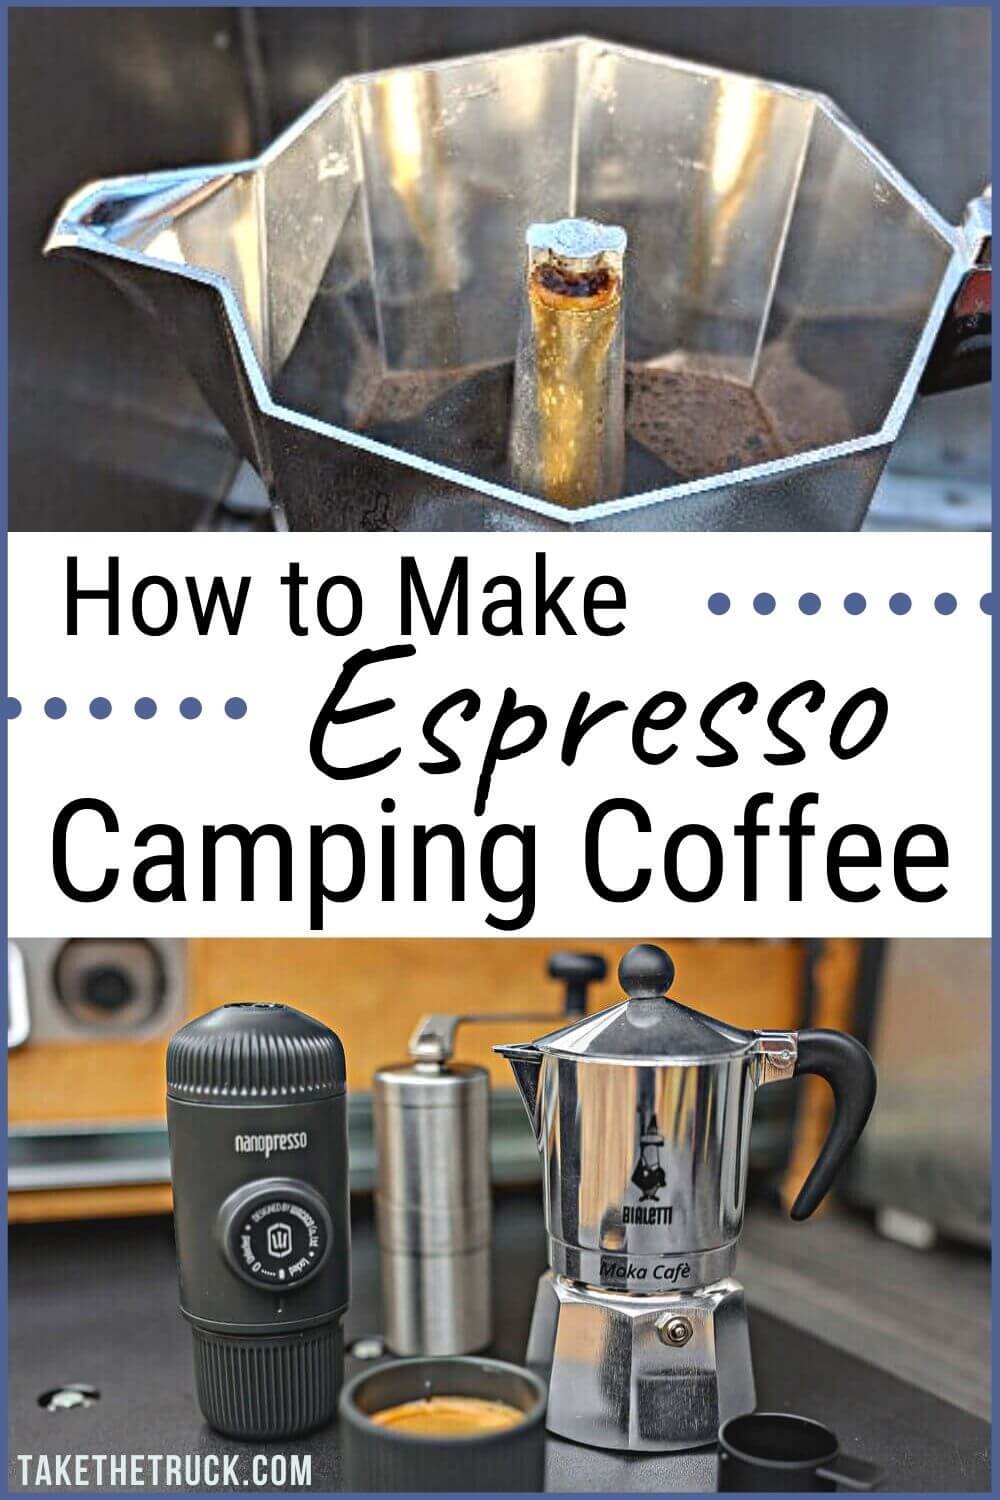 This Camping Espresso Maker Is a Genius Kitchen Space-Saver